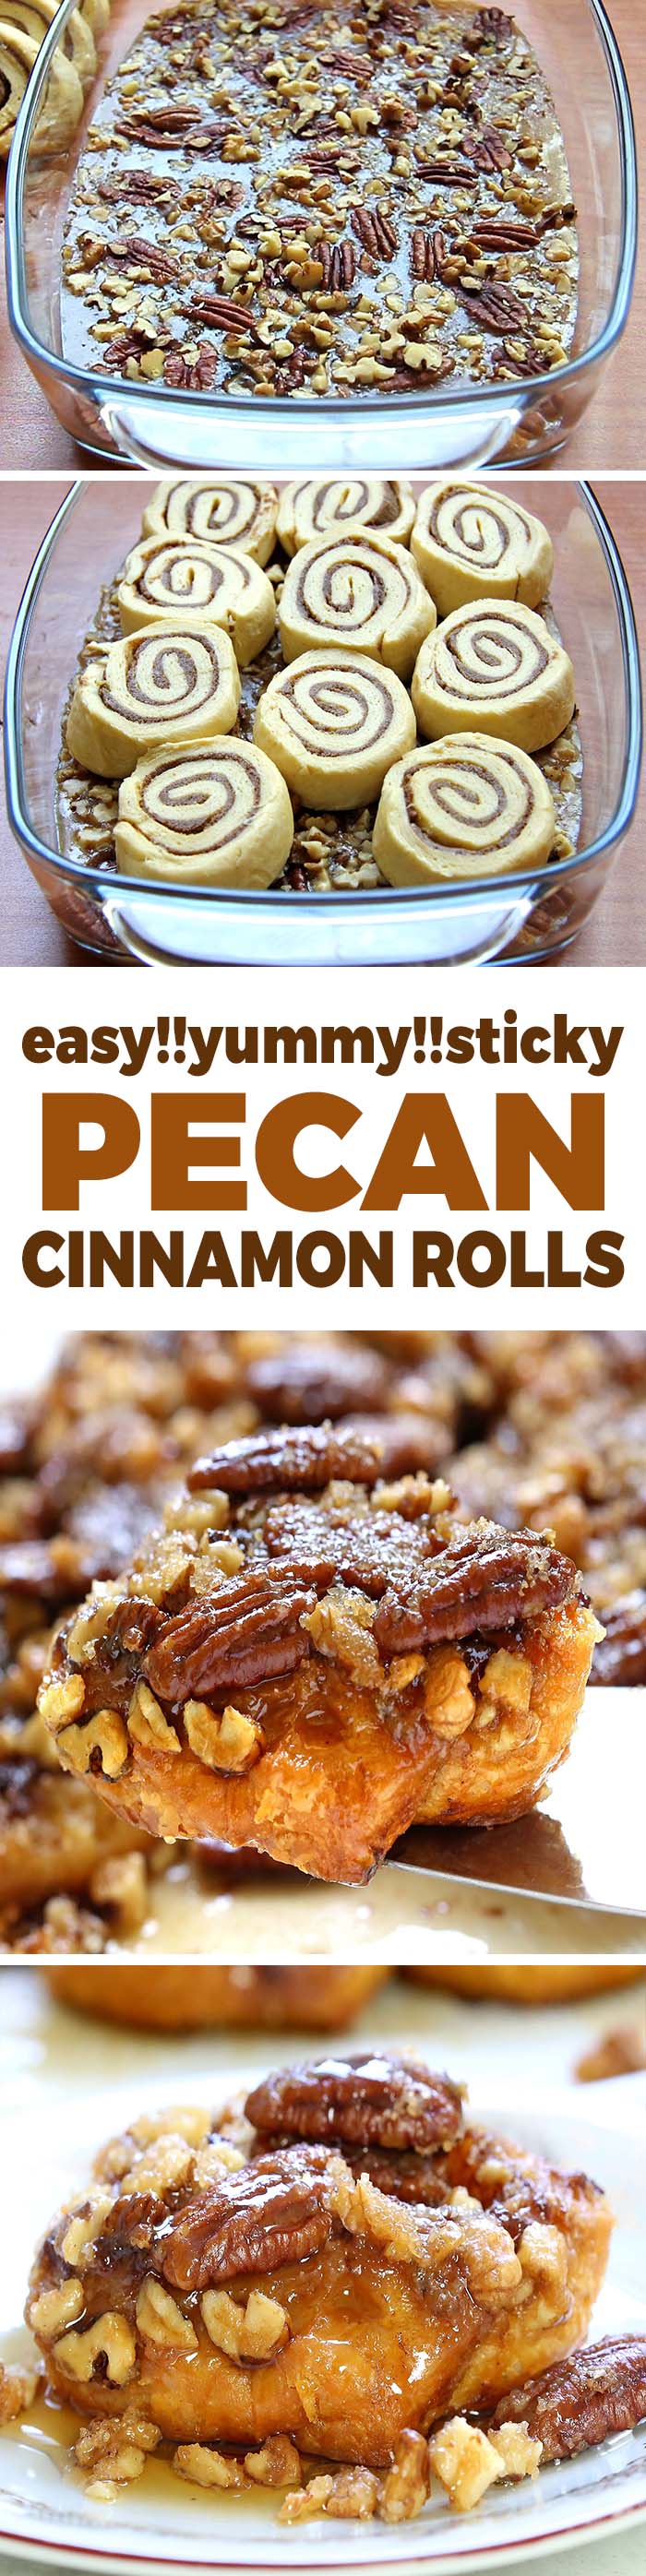 Caramel Pecan Cinnamon Rolls are made easier with refrigerated cinnamon rolls, and simple caramel sauce that goes into the bottom of your pan, along with pecans.